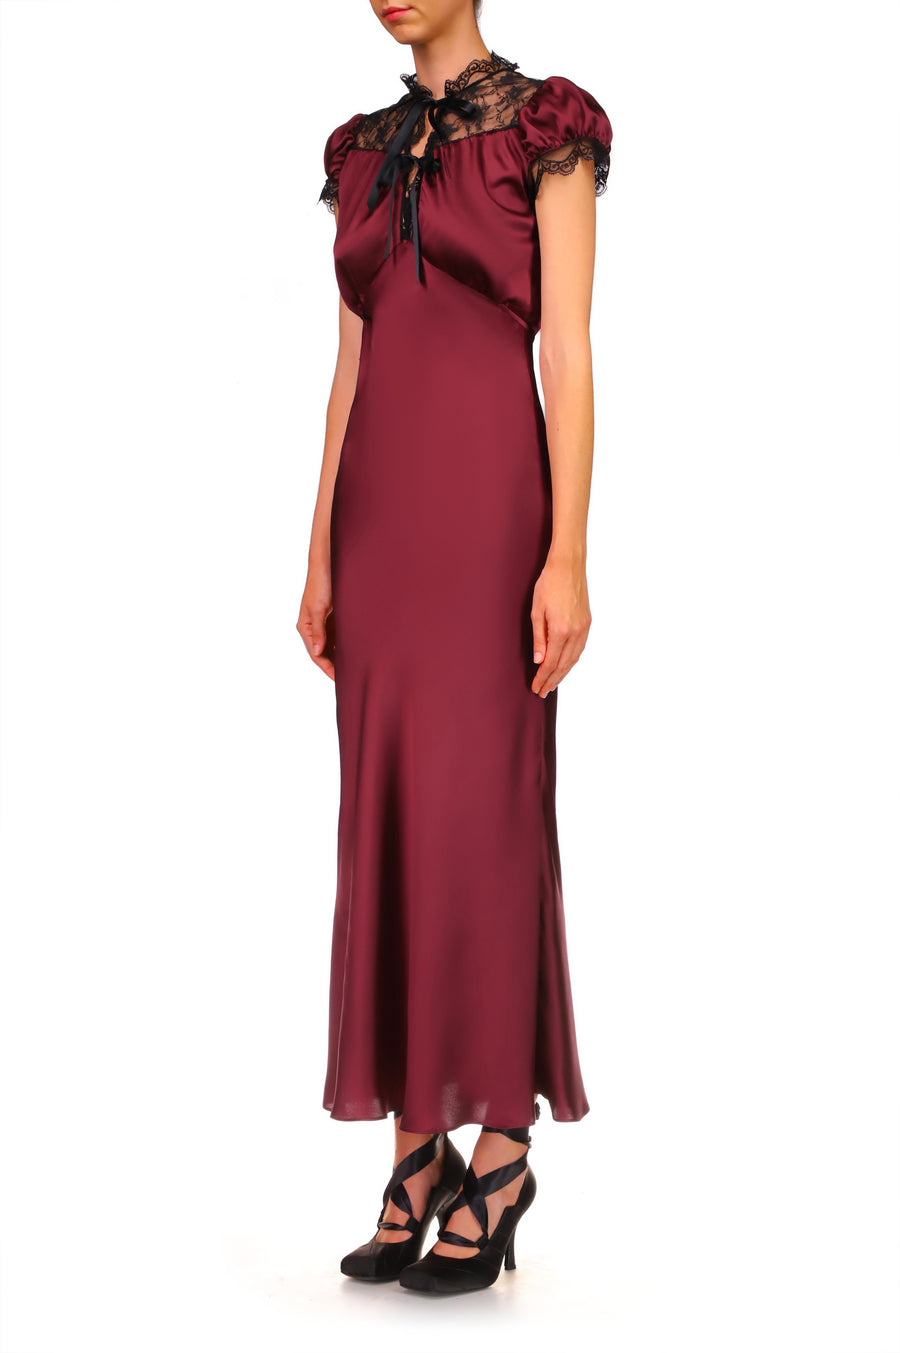 Burgundy Silk Satin Bias Dress With Lace And Ruffle Details